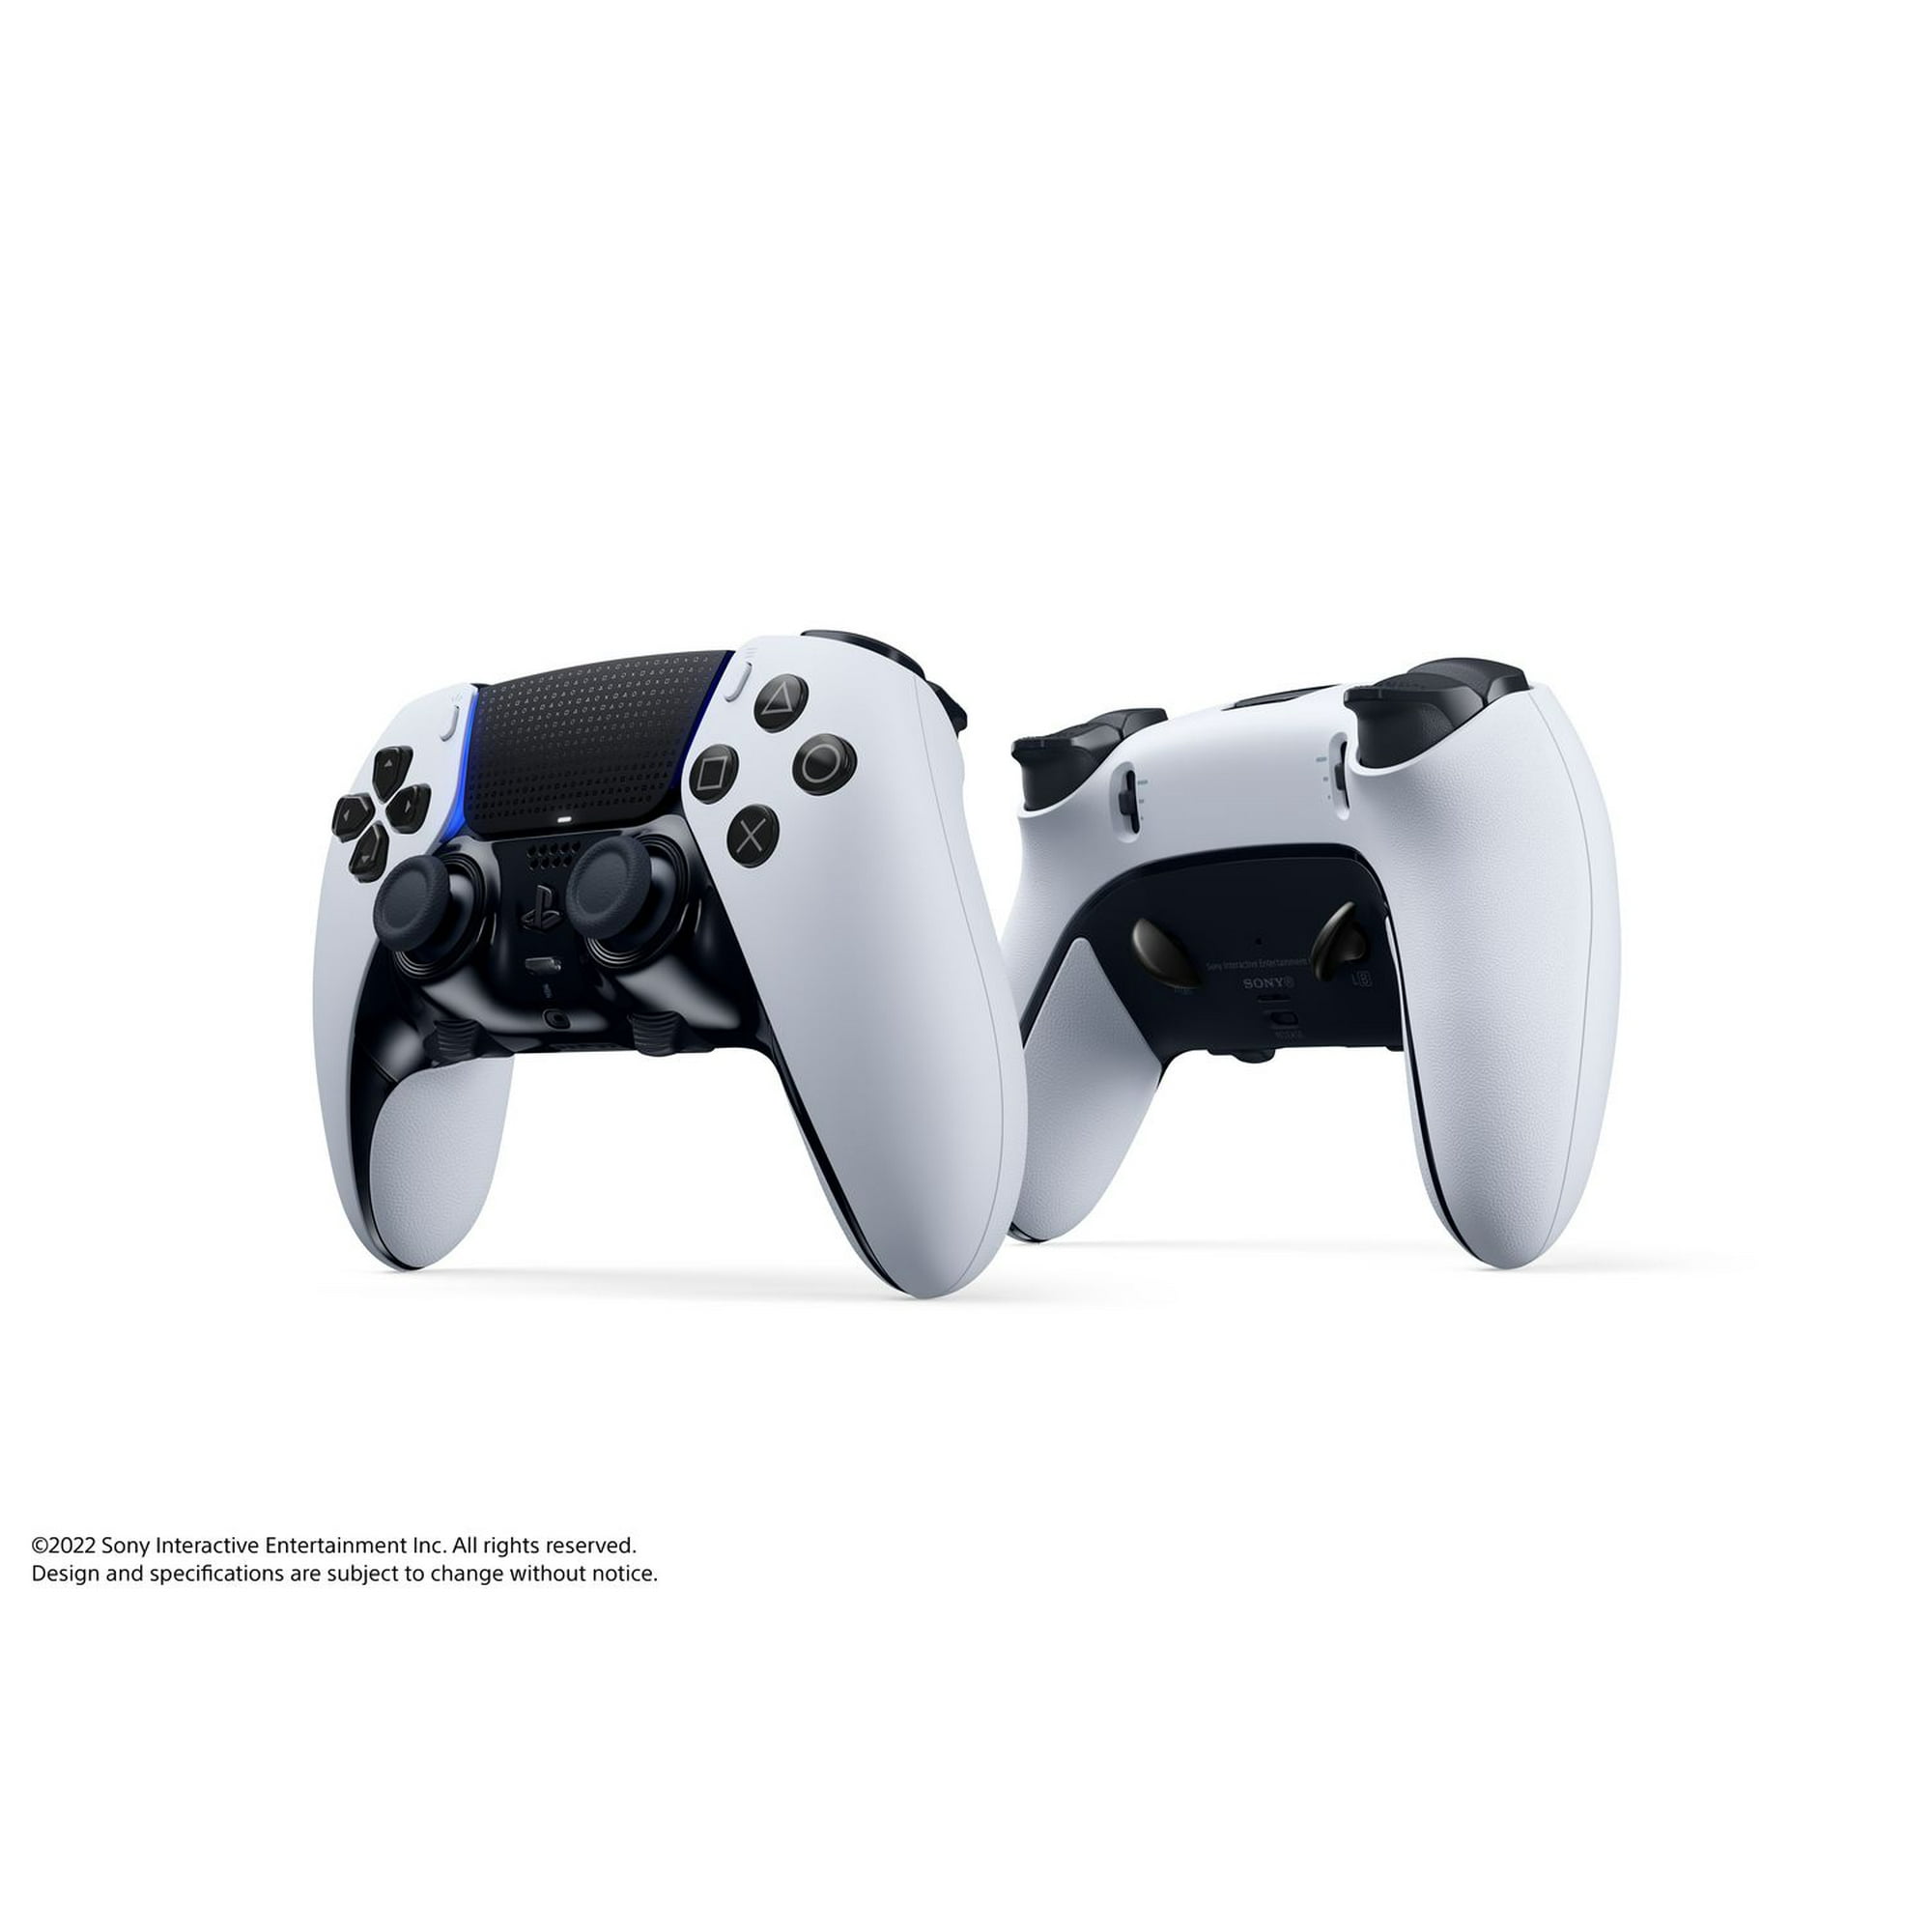 PlayStation®5 DualSense Edge™ Wireless Controller, Perfect Your